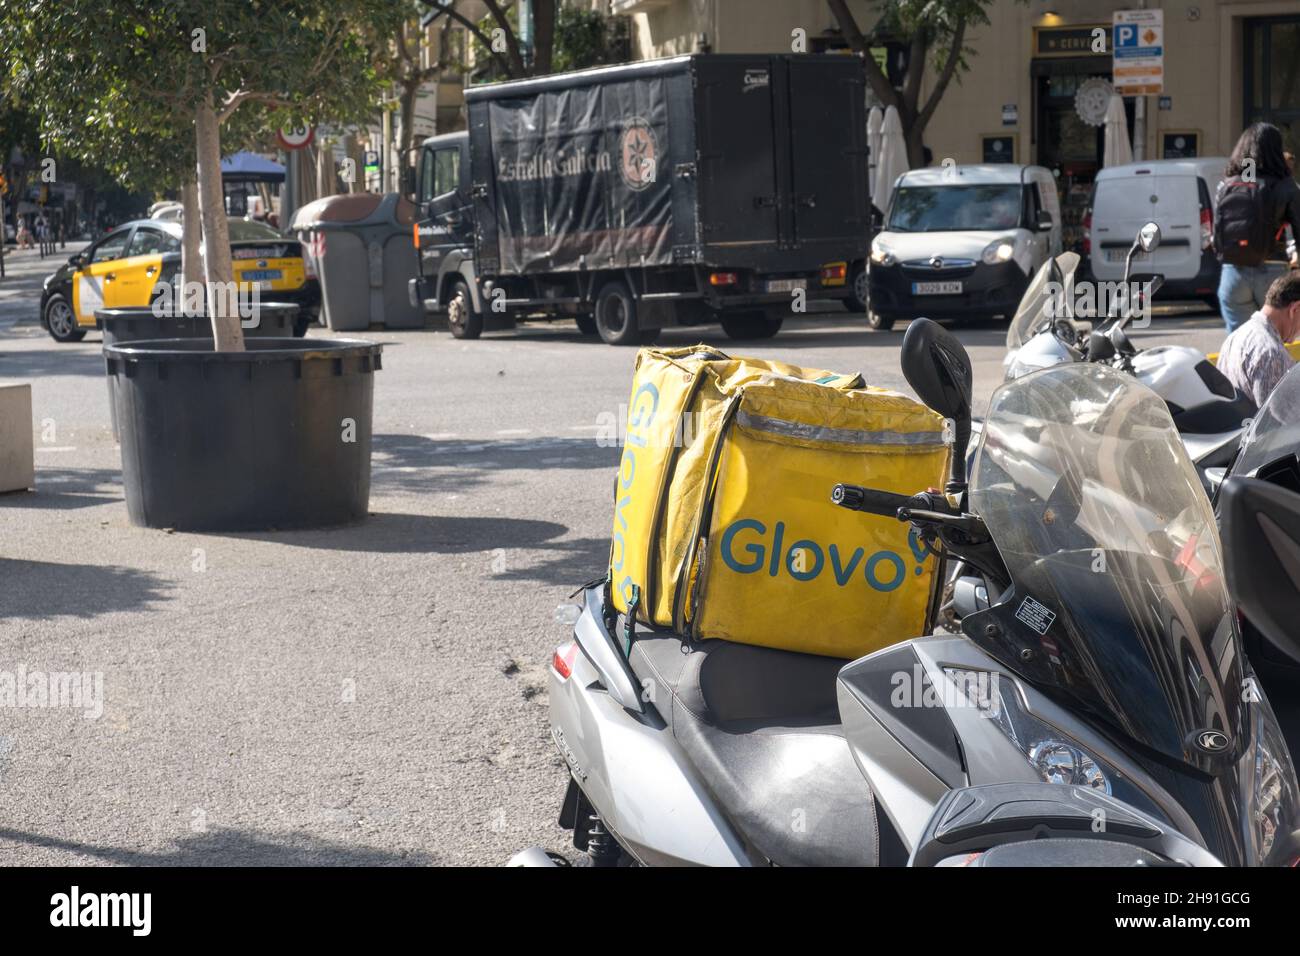 Barcelona, Spain - 5 November 2021: Glovo app service delivery box on scooter outdoor, Illustrative Editorial. Stock Photo